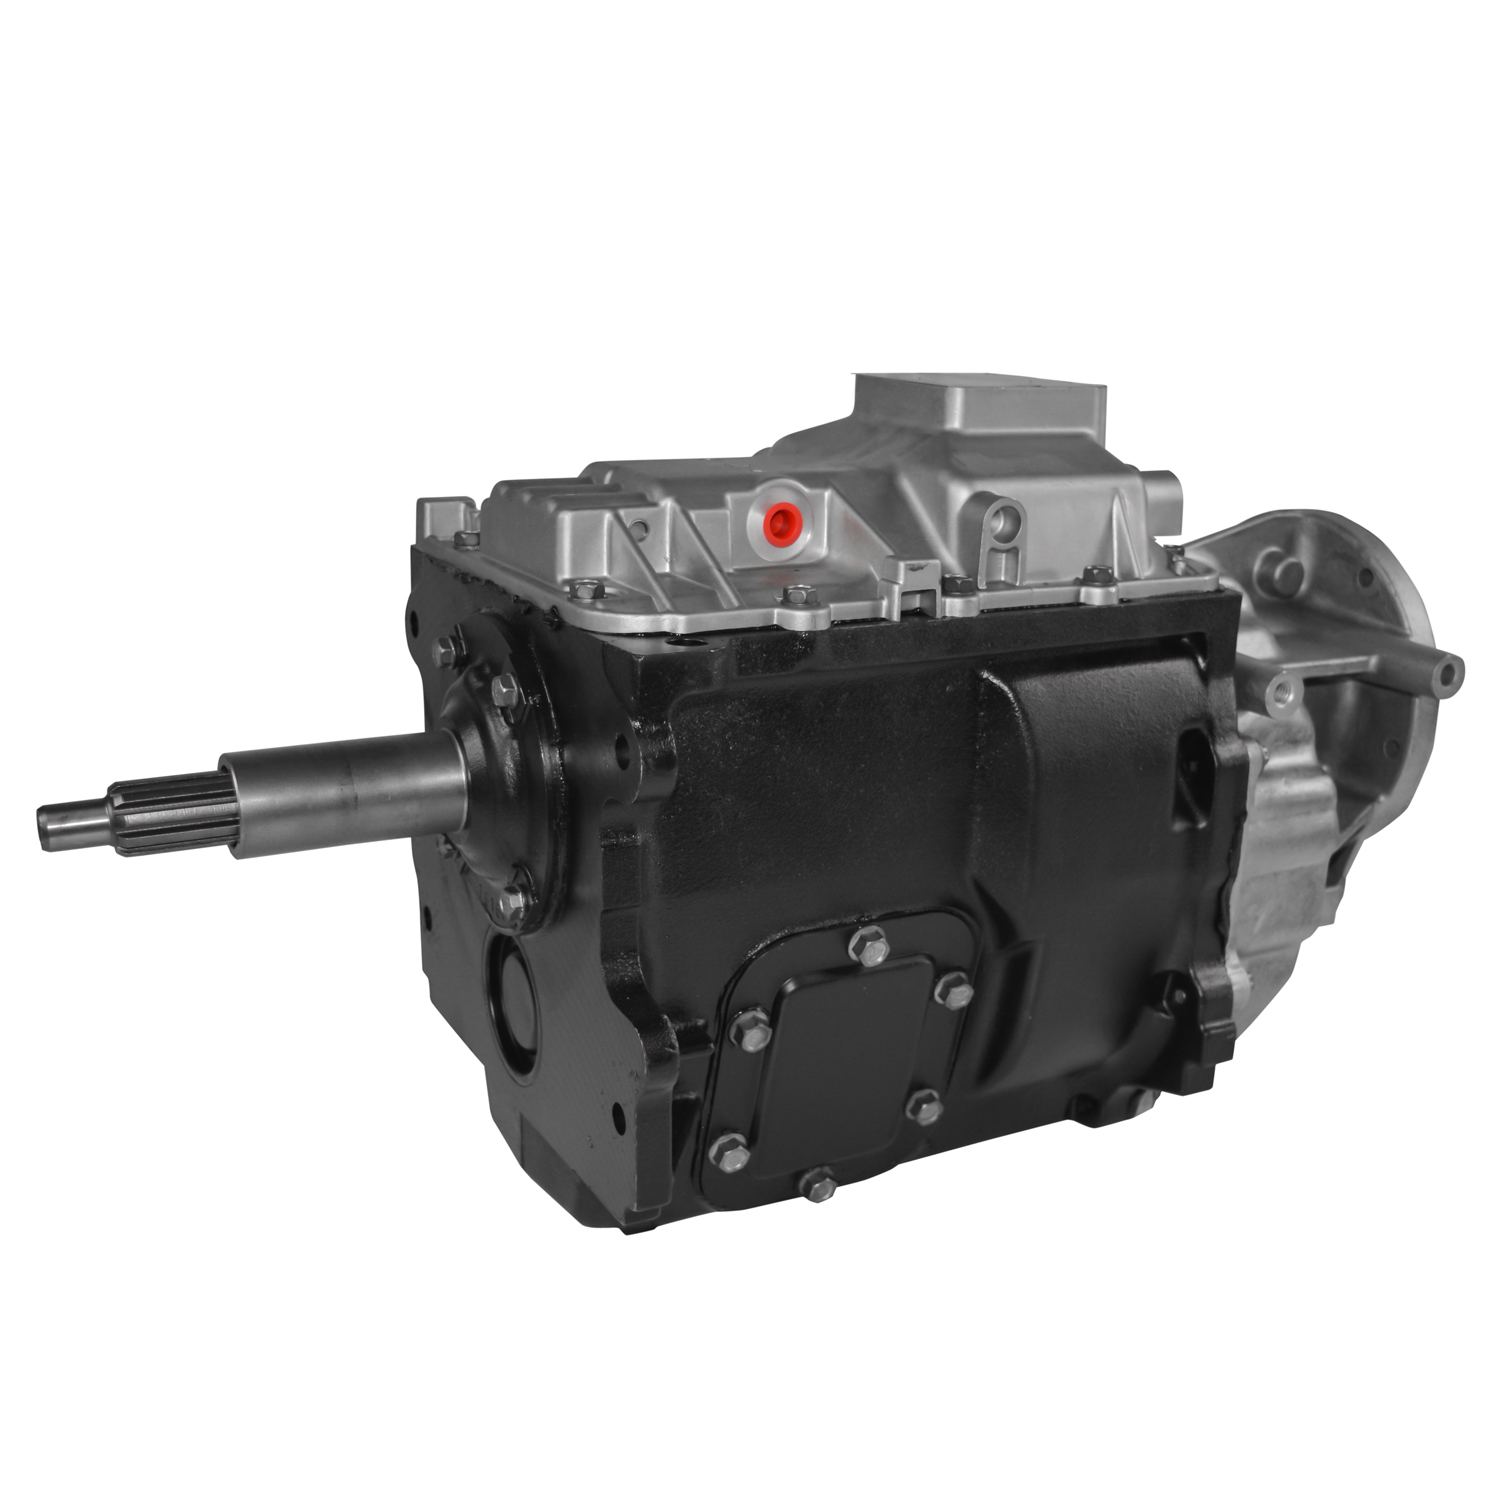 Remanufactured 47RE Transmissions